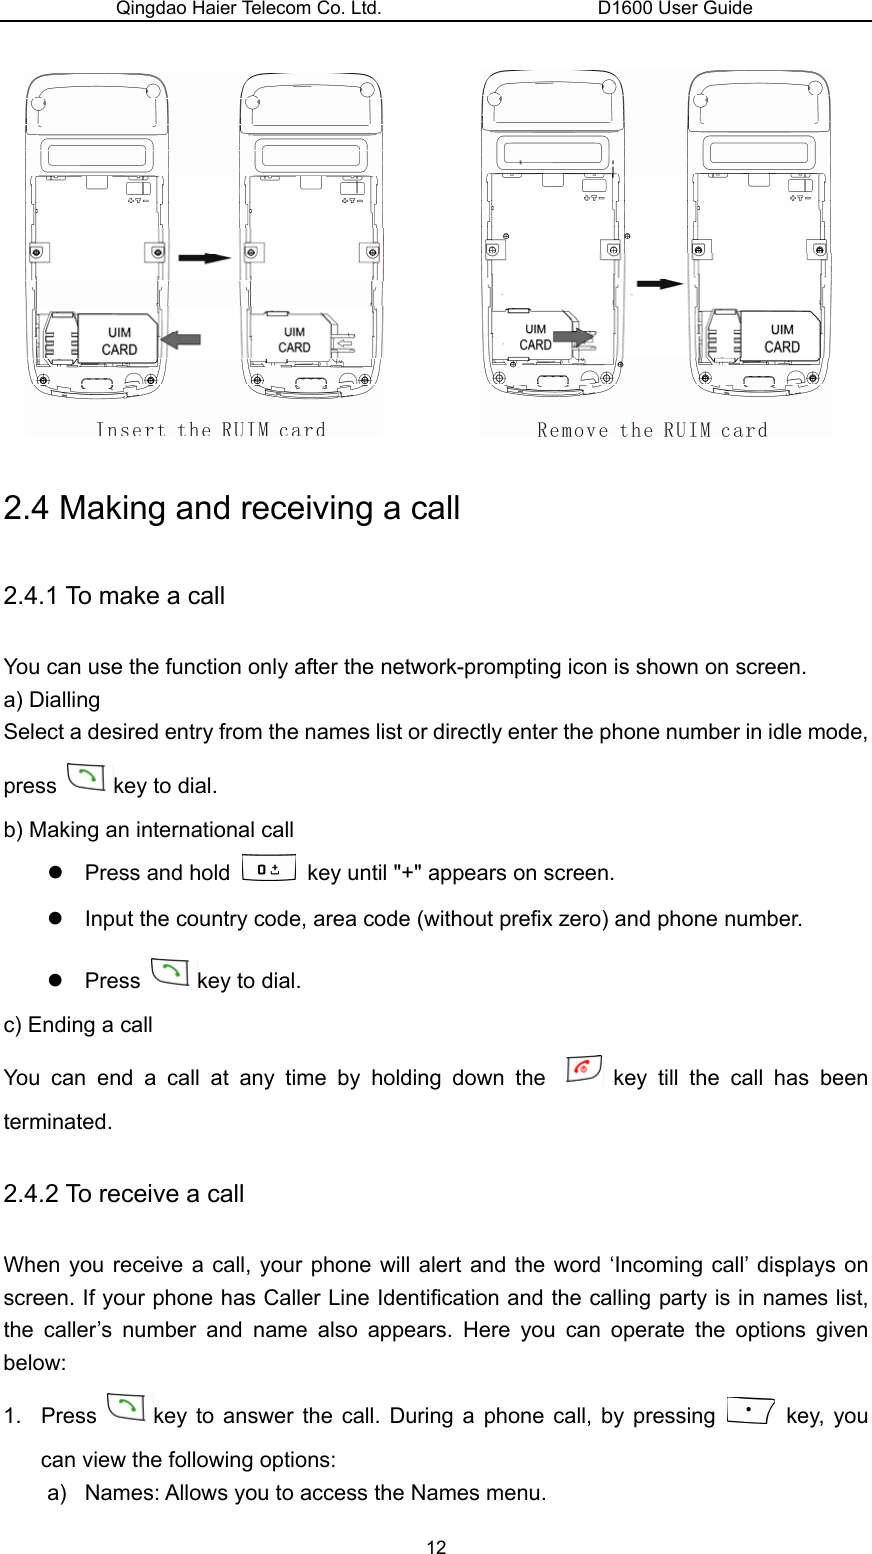 Qingdao Haier Telecom Co. Ltd.                       D1600 User Guide            2.4 Making and receiving a call 2.4.1 To make a call You can use the function only after the network-prompting icon is shown on screen. a) Dialling Select a desired entry from the names list or directly enter the phone number in idle mode, press  key to dial. b) Making an international call z  Press and hold    key until &quot;+&quot; appears on screen. z  Input the country code, area code (without prefix zero) and phone number. z Press  key to dial. c) Ending a call You can end a call at any time by holding down the   key till the call has been terminated. 2.4.2 To receive a call When you receive a call, your phone will alert and the word ‘Incoming call’ displays on screen. If your phone has Caller Line Identification and the calling party is in names list, the caller’s number and name also appears. Here you can operate the options given below: 1. Press  key to answer the call. During a phone call, by pressing   key, you can view the following options: a)  Names: Allows you to access the Names menu. 12 